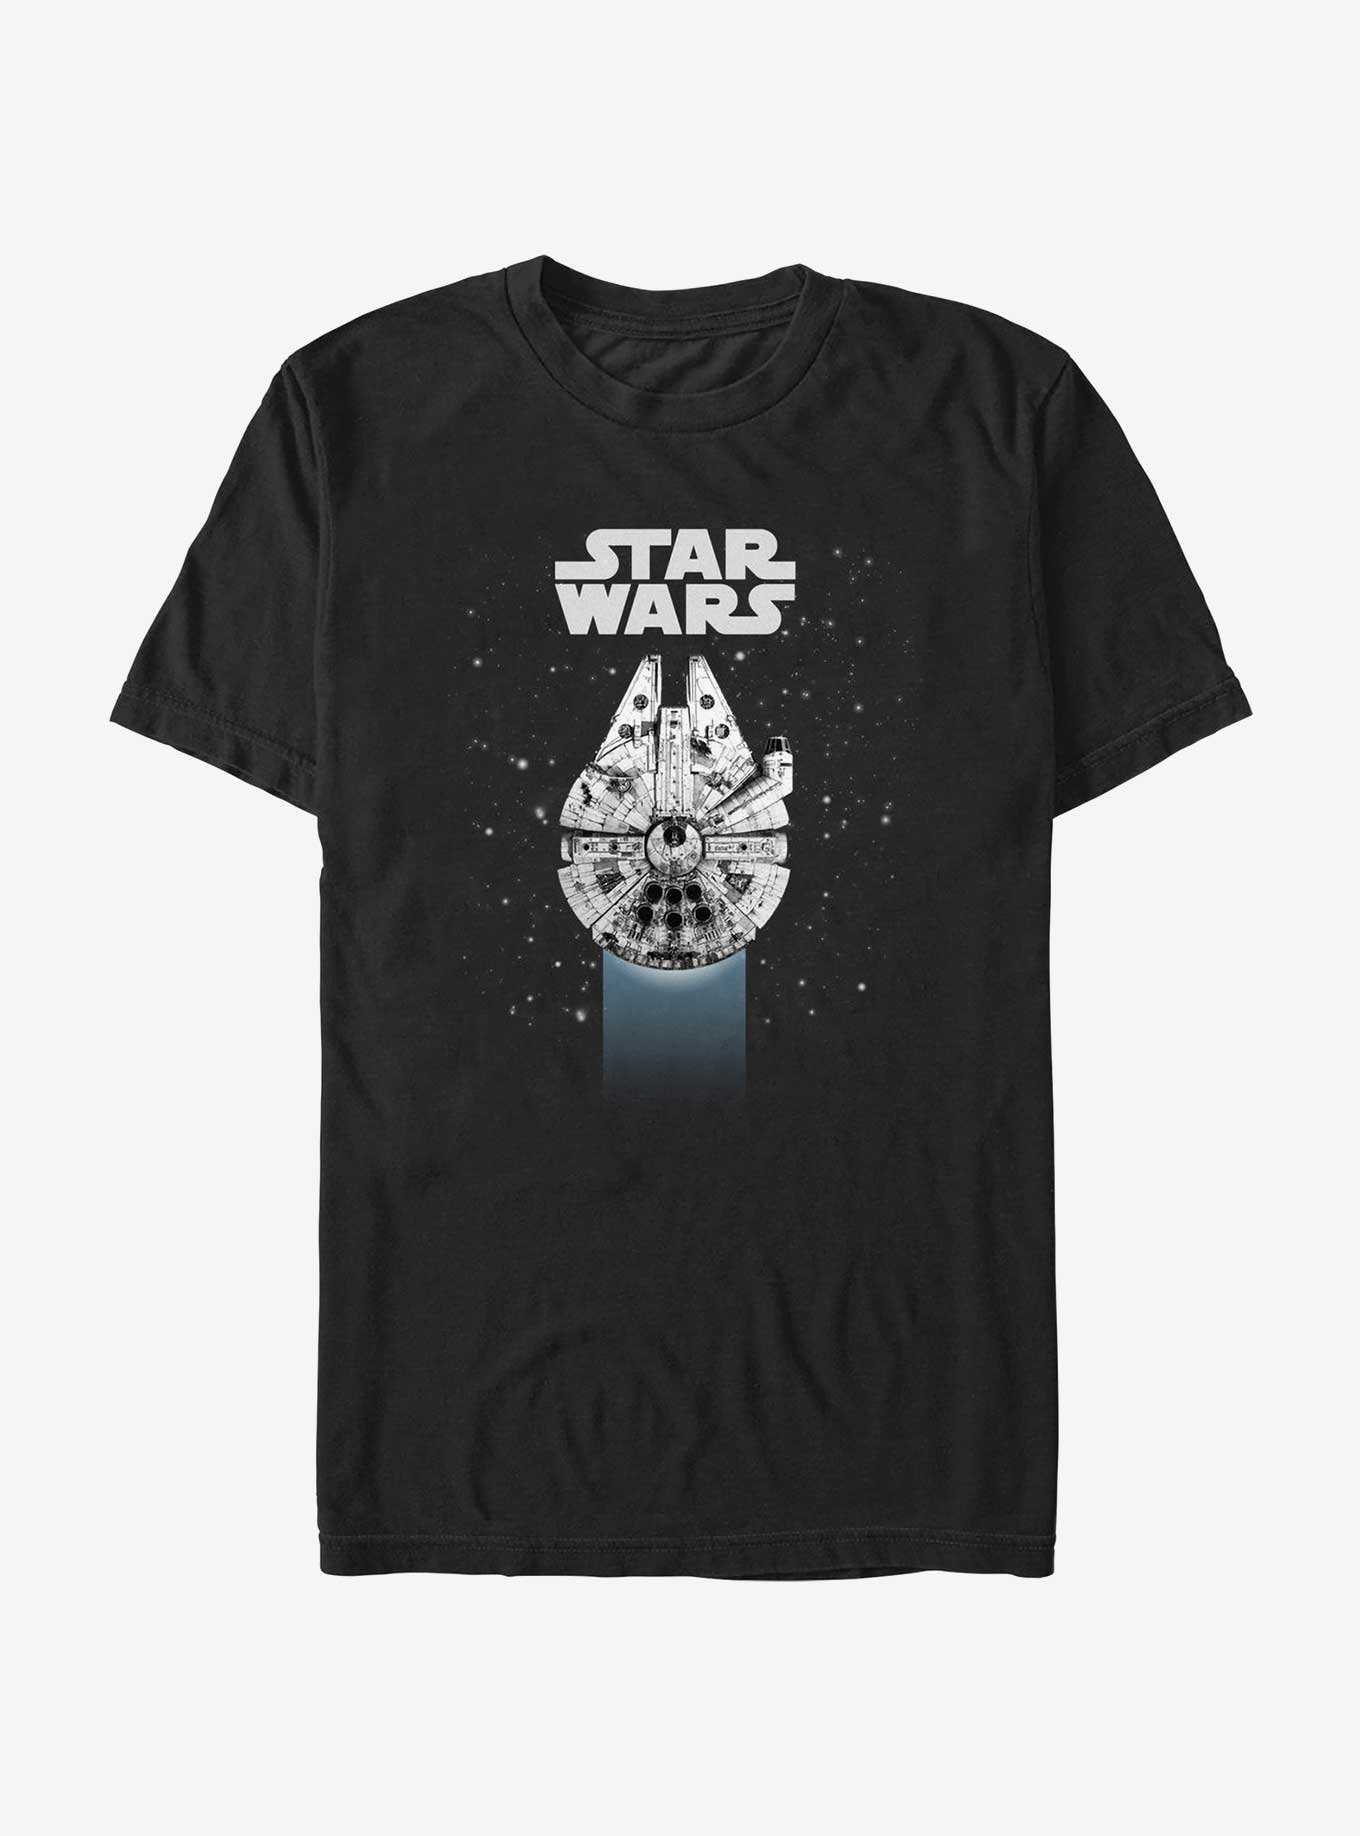 Star Wars Millennium Falcon Fly By T-Shirt, , hi-res